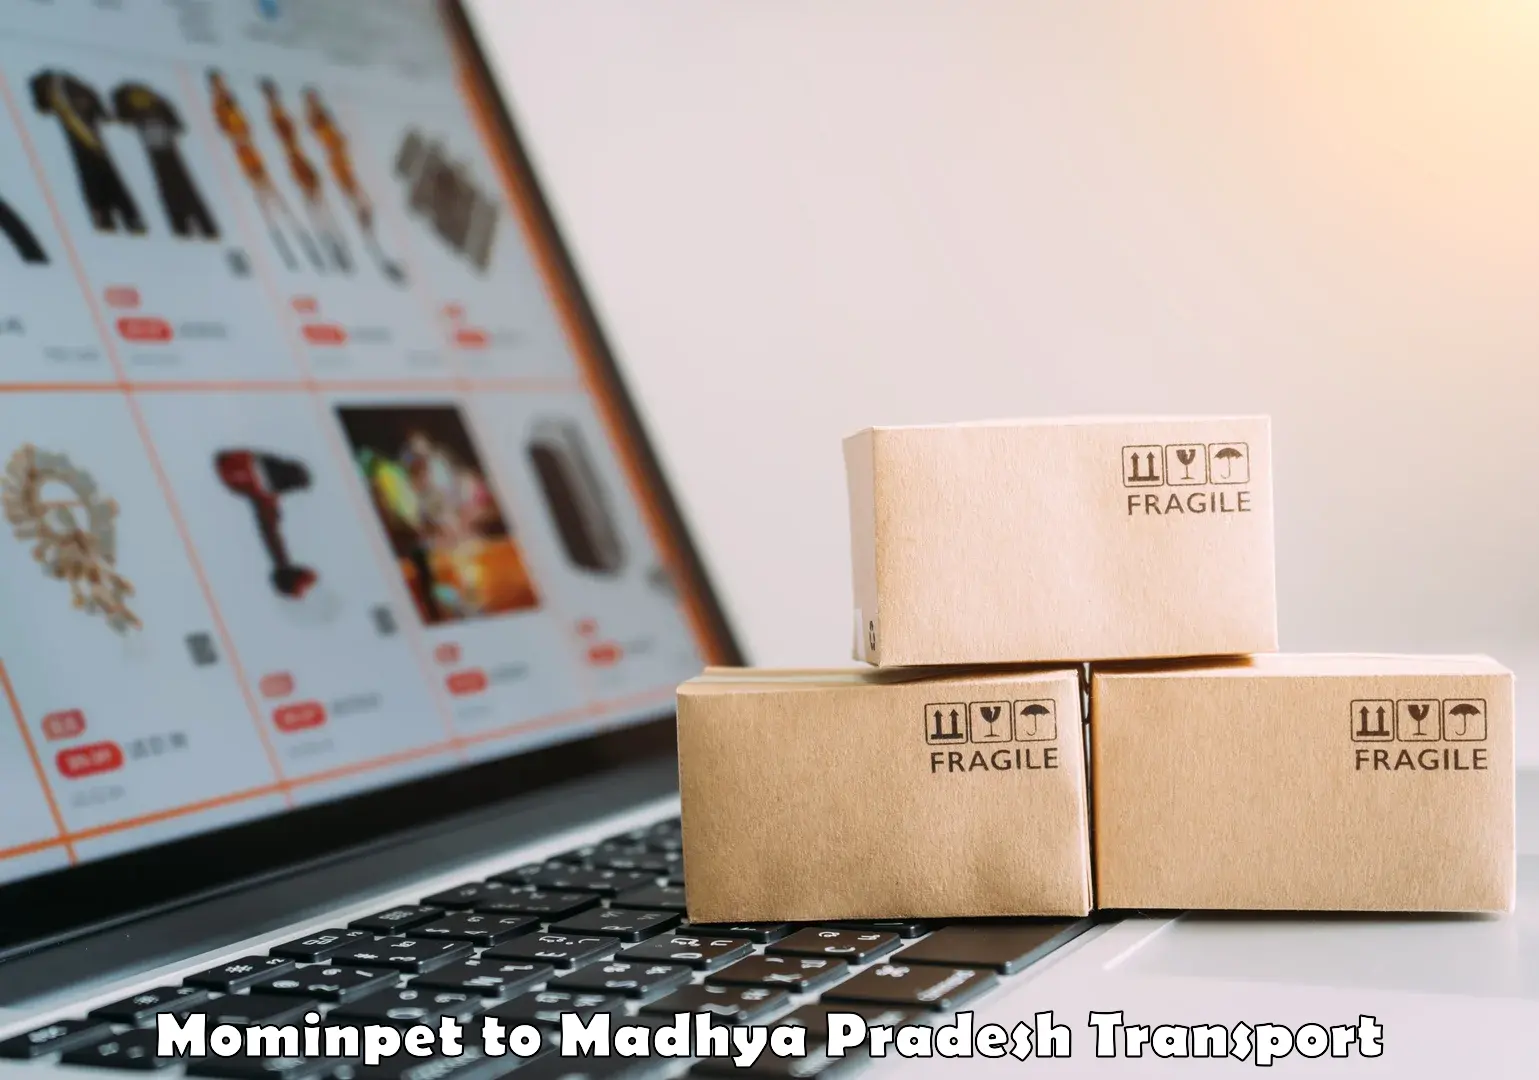 Transport shared services Mominpet to Madhya Pradesh